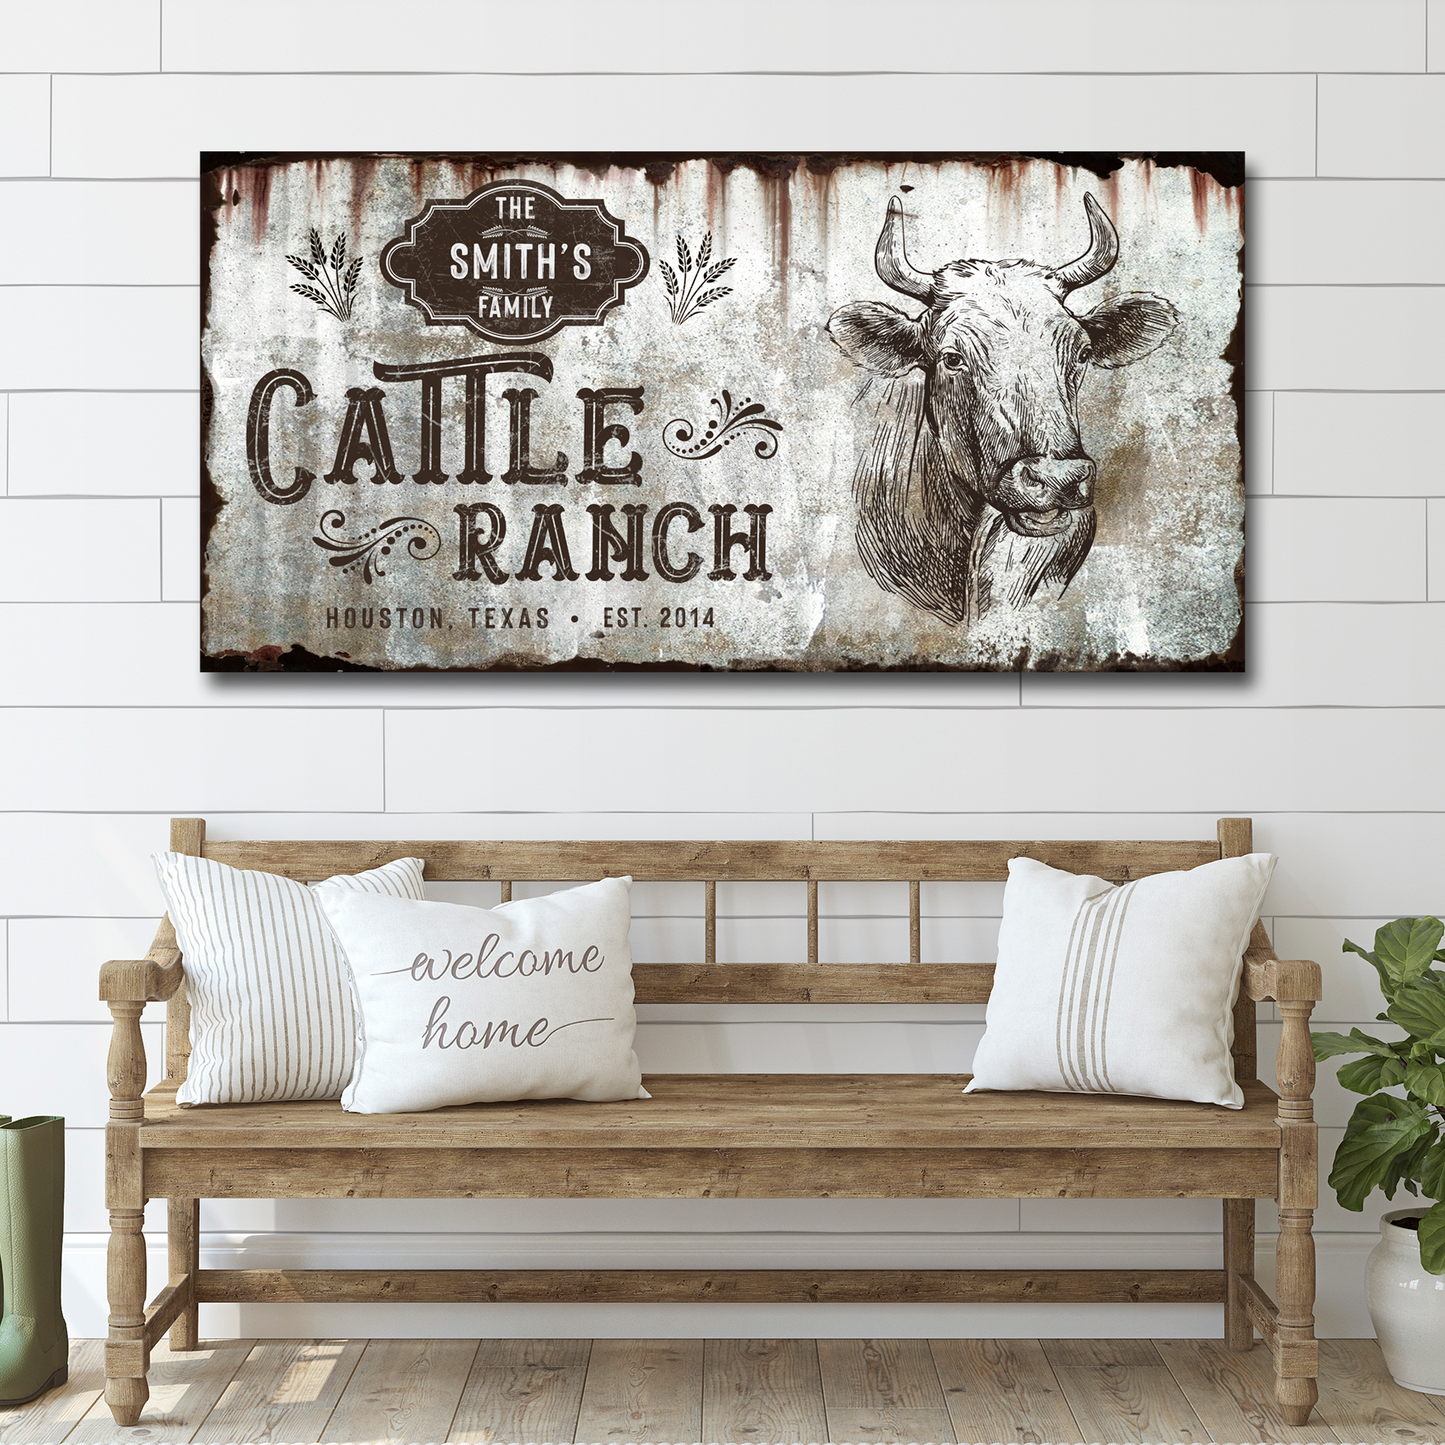 Vintage Cattle Ranch Sign - Image by Tailored Canvases